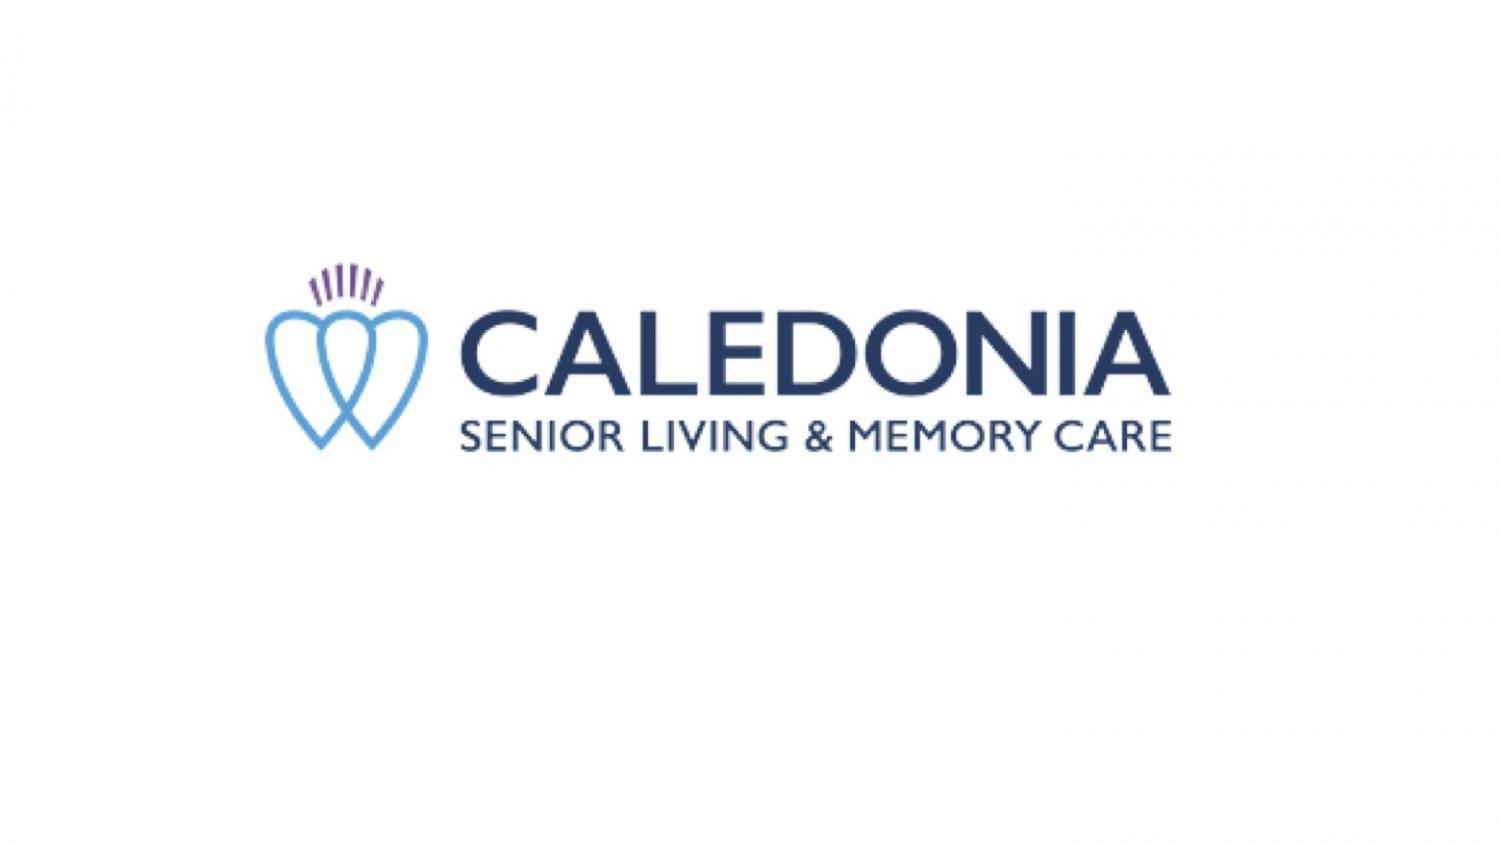 Caledonia Senior Living & Memory Care in North Riverside Launches Monthly Memory
Sat Aug 27, 10:30 AM - Tue Dec 27, 11:30 PM